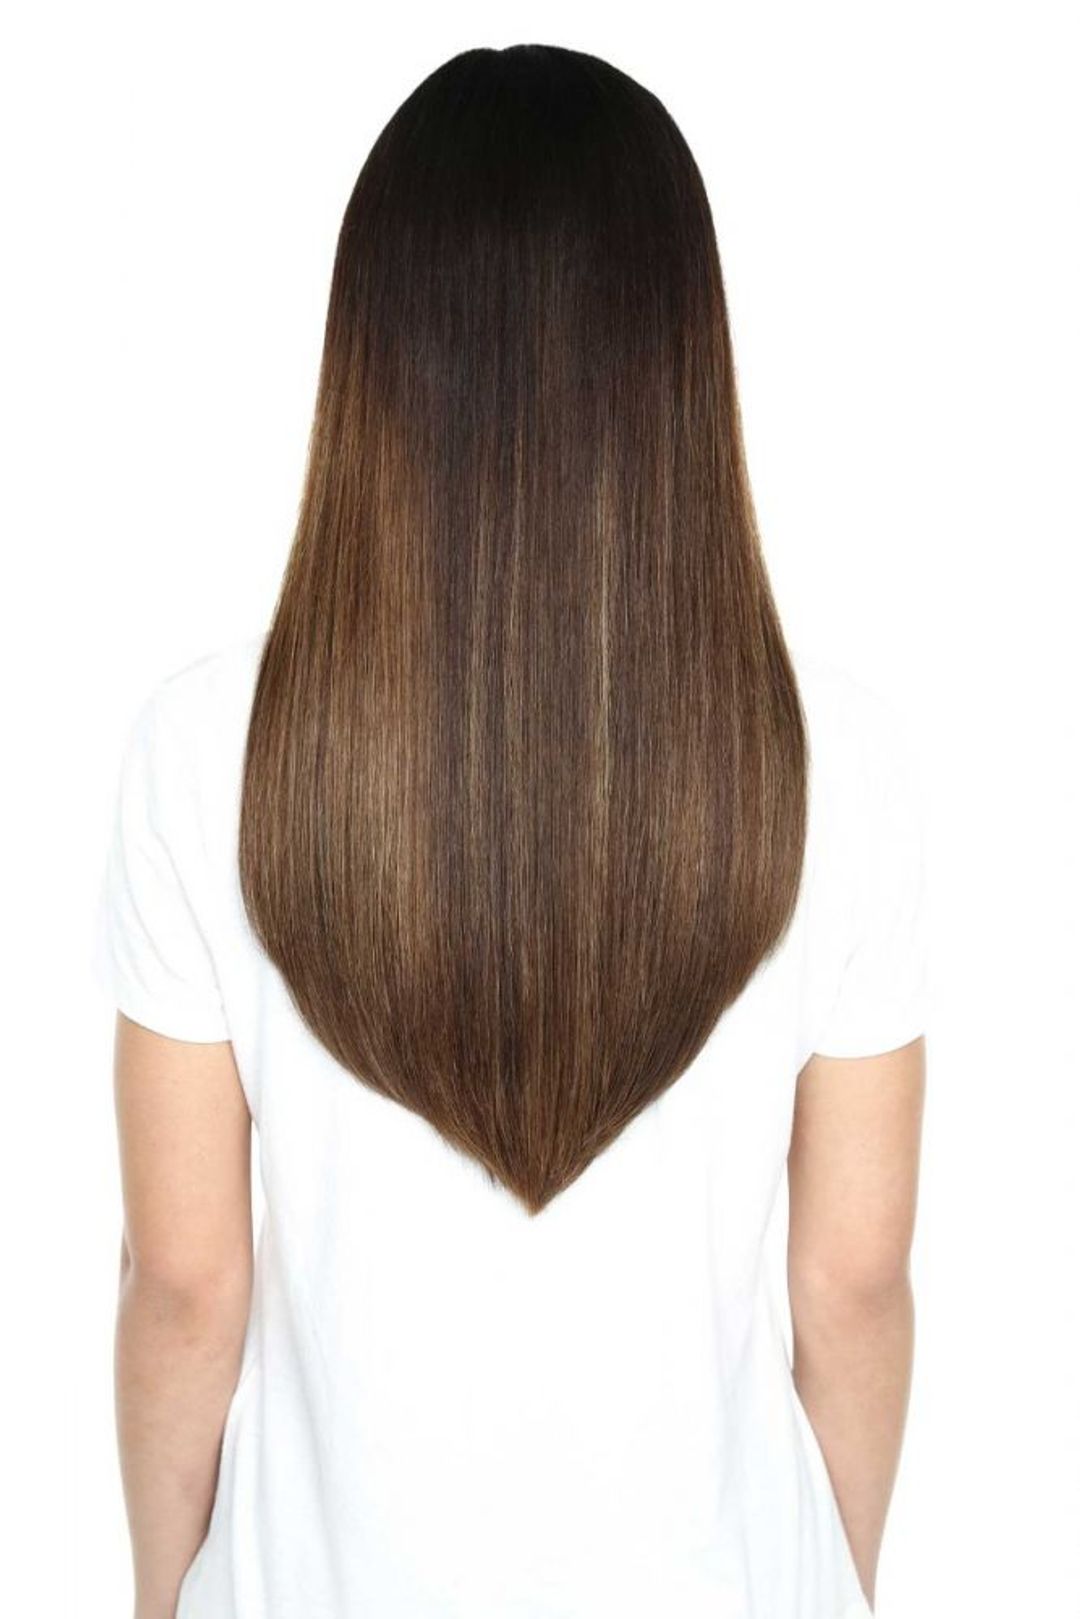 Beauty Works Gold Double Weft Extensions - Oak,18"